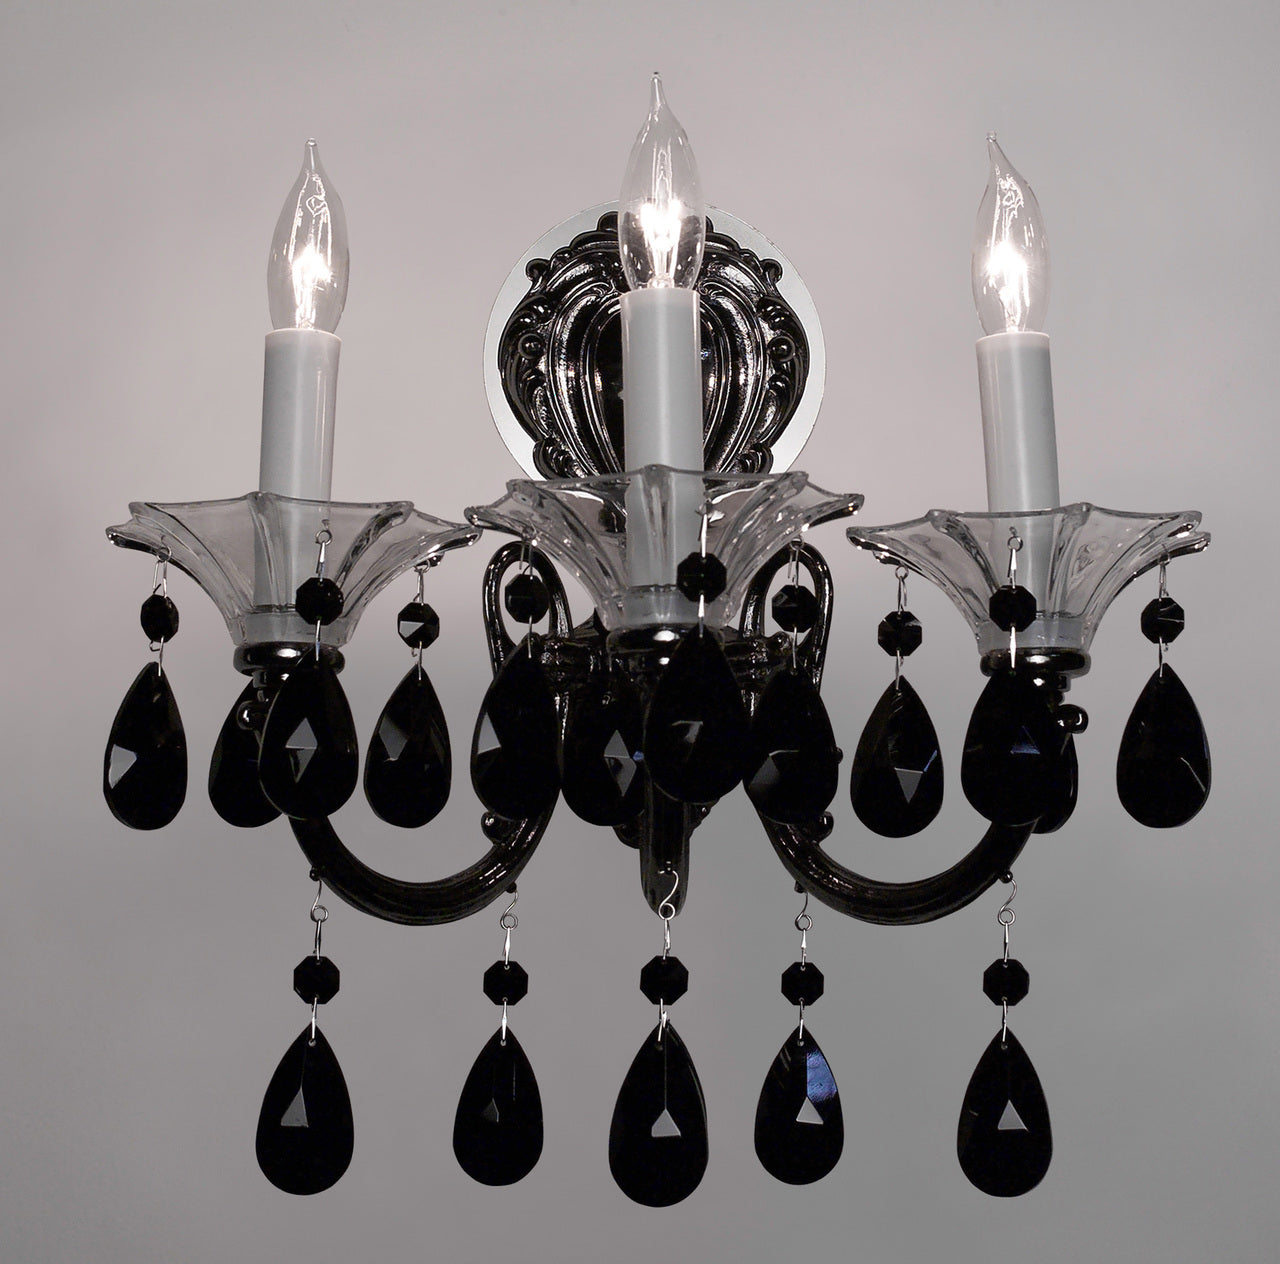 Classic Lighting 57053 EP SJT Via Lombardi Crystal Wall Sconce in Ebony Pearl (Imported from Spain)